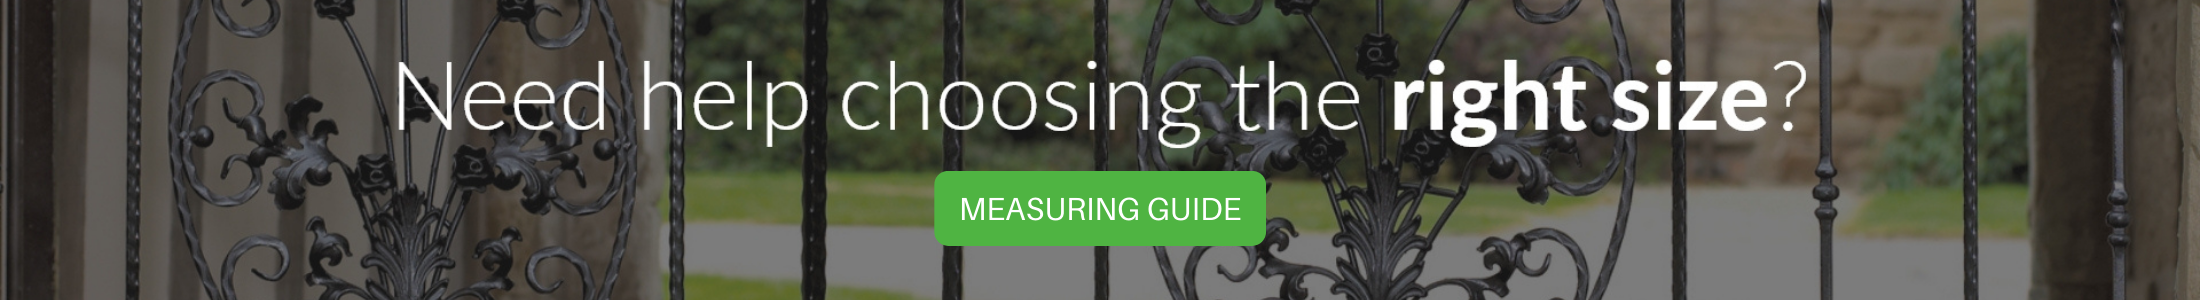 View the single gate measuring guide